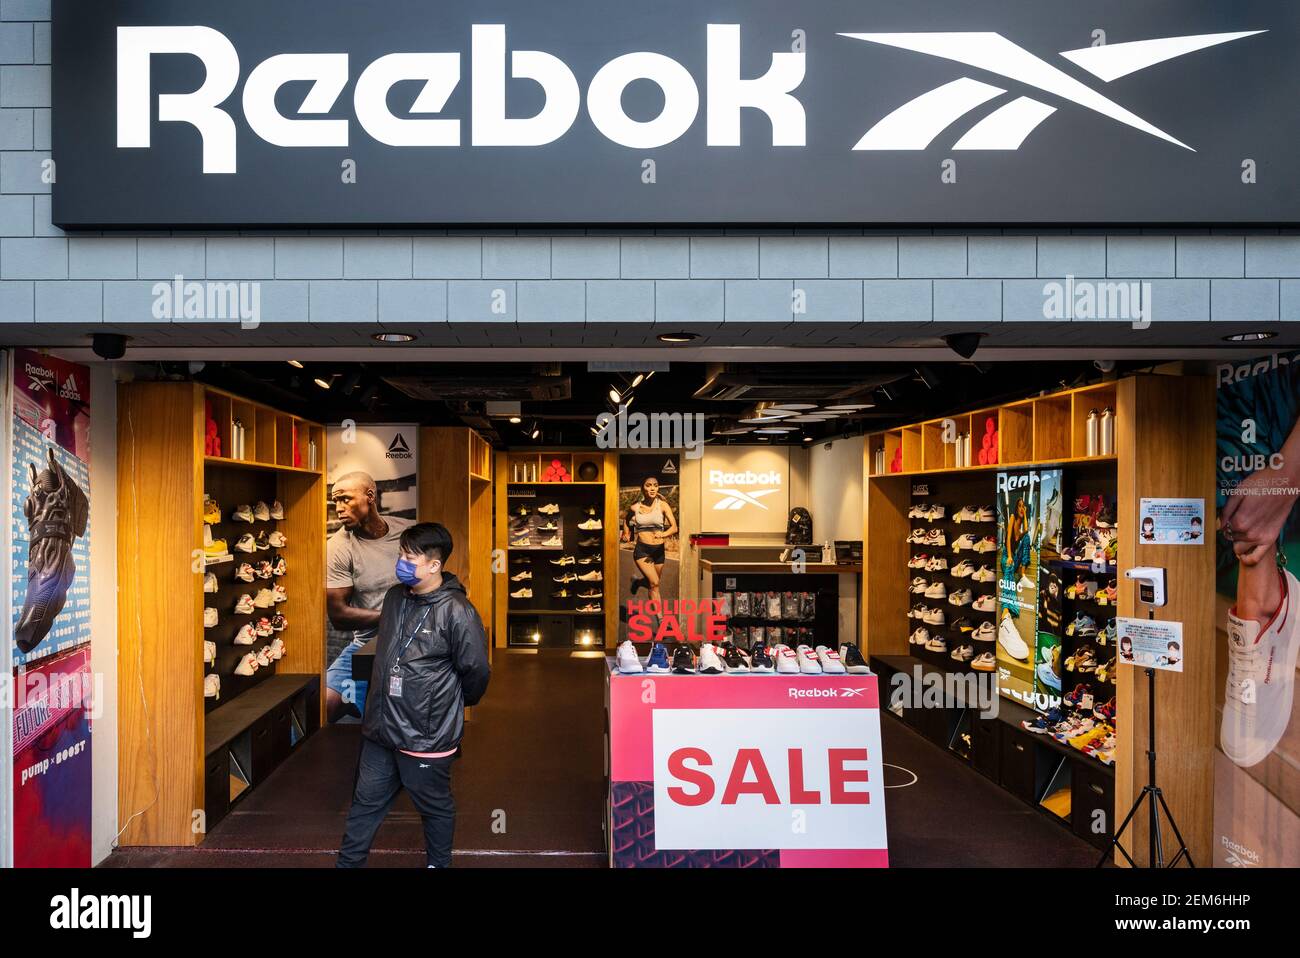 Reebok store photography and images - Alamy